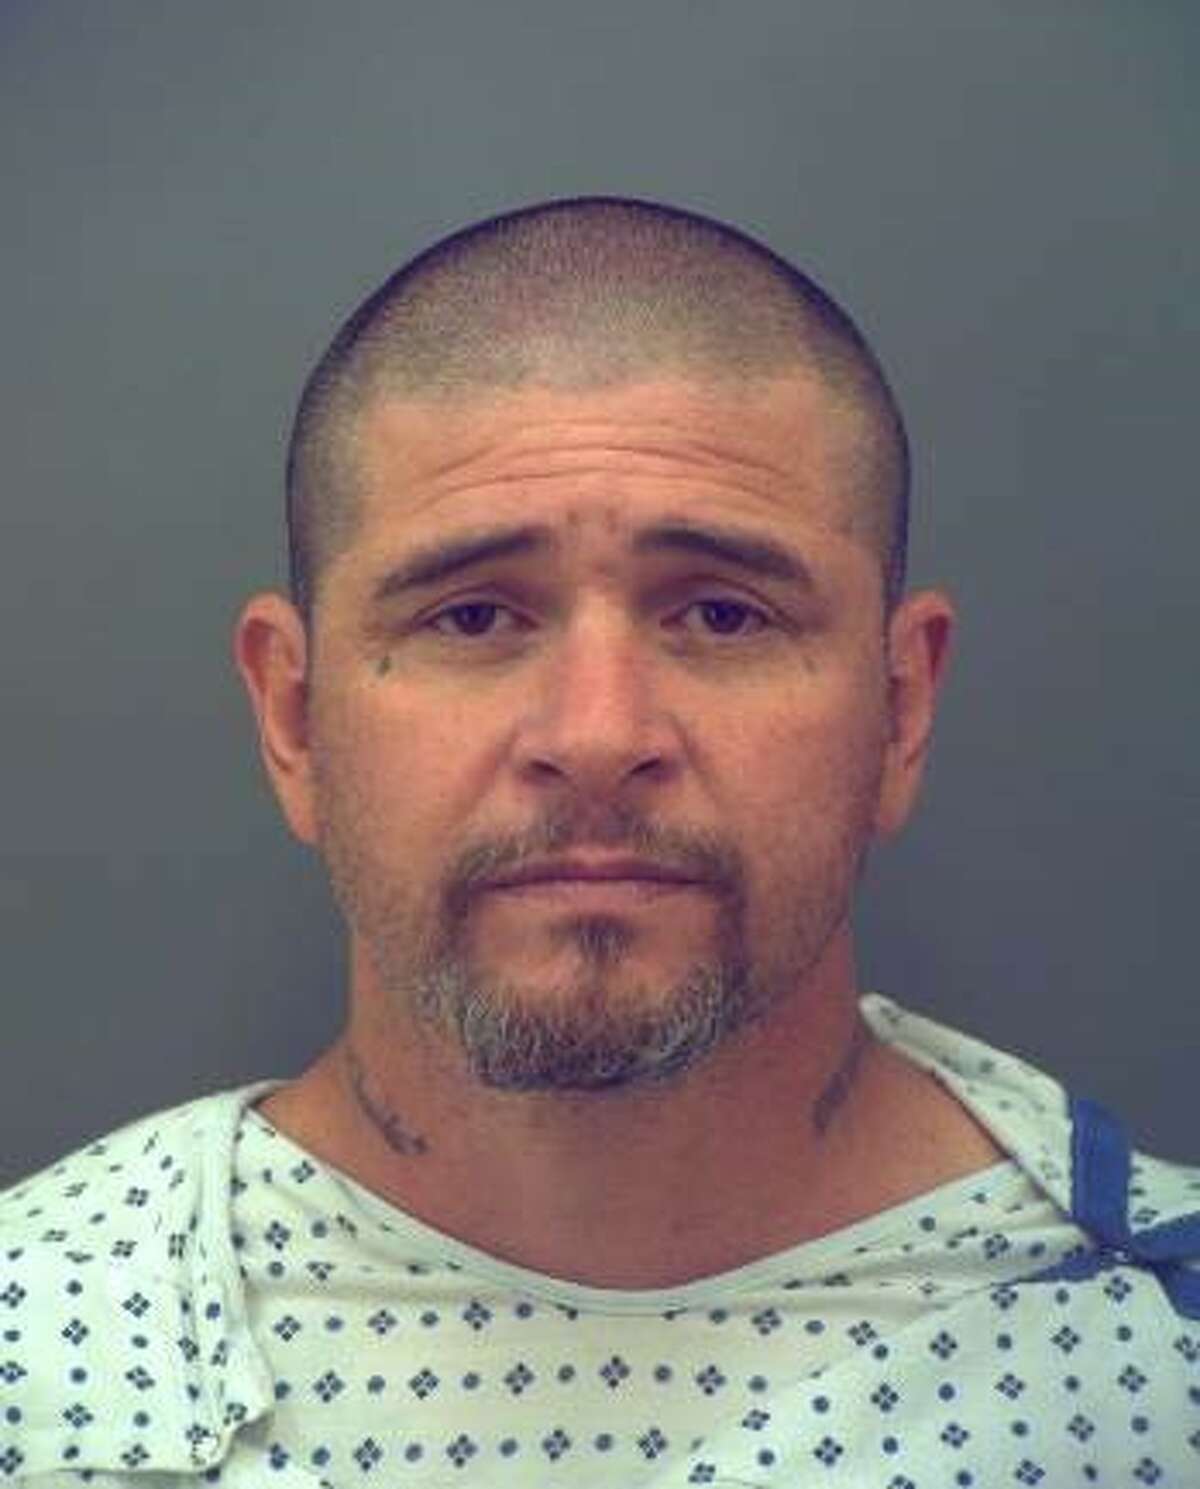 John Perry (pictured) — a 45-year-old El Paso man previously accused of being a member of the Barrio Azteca gang — was behind the wheel of a Kia Optima when he hit a motorcycle driven by Officer David Ortiz from behind on March 10, the El Paso Police Department announced Monday. Ortiz died of his injuries on March 14.